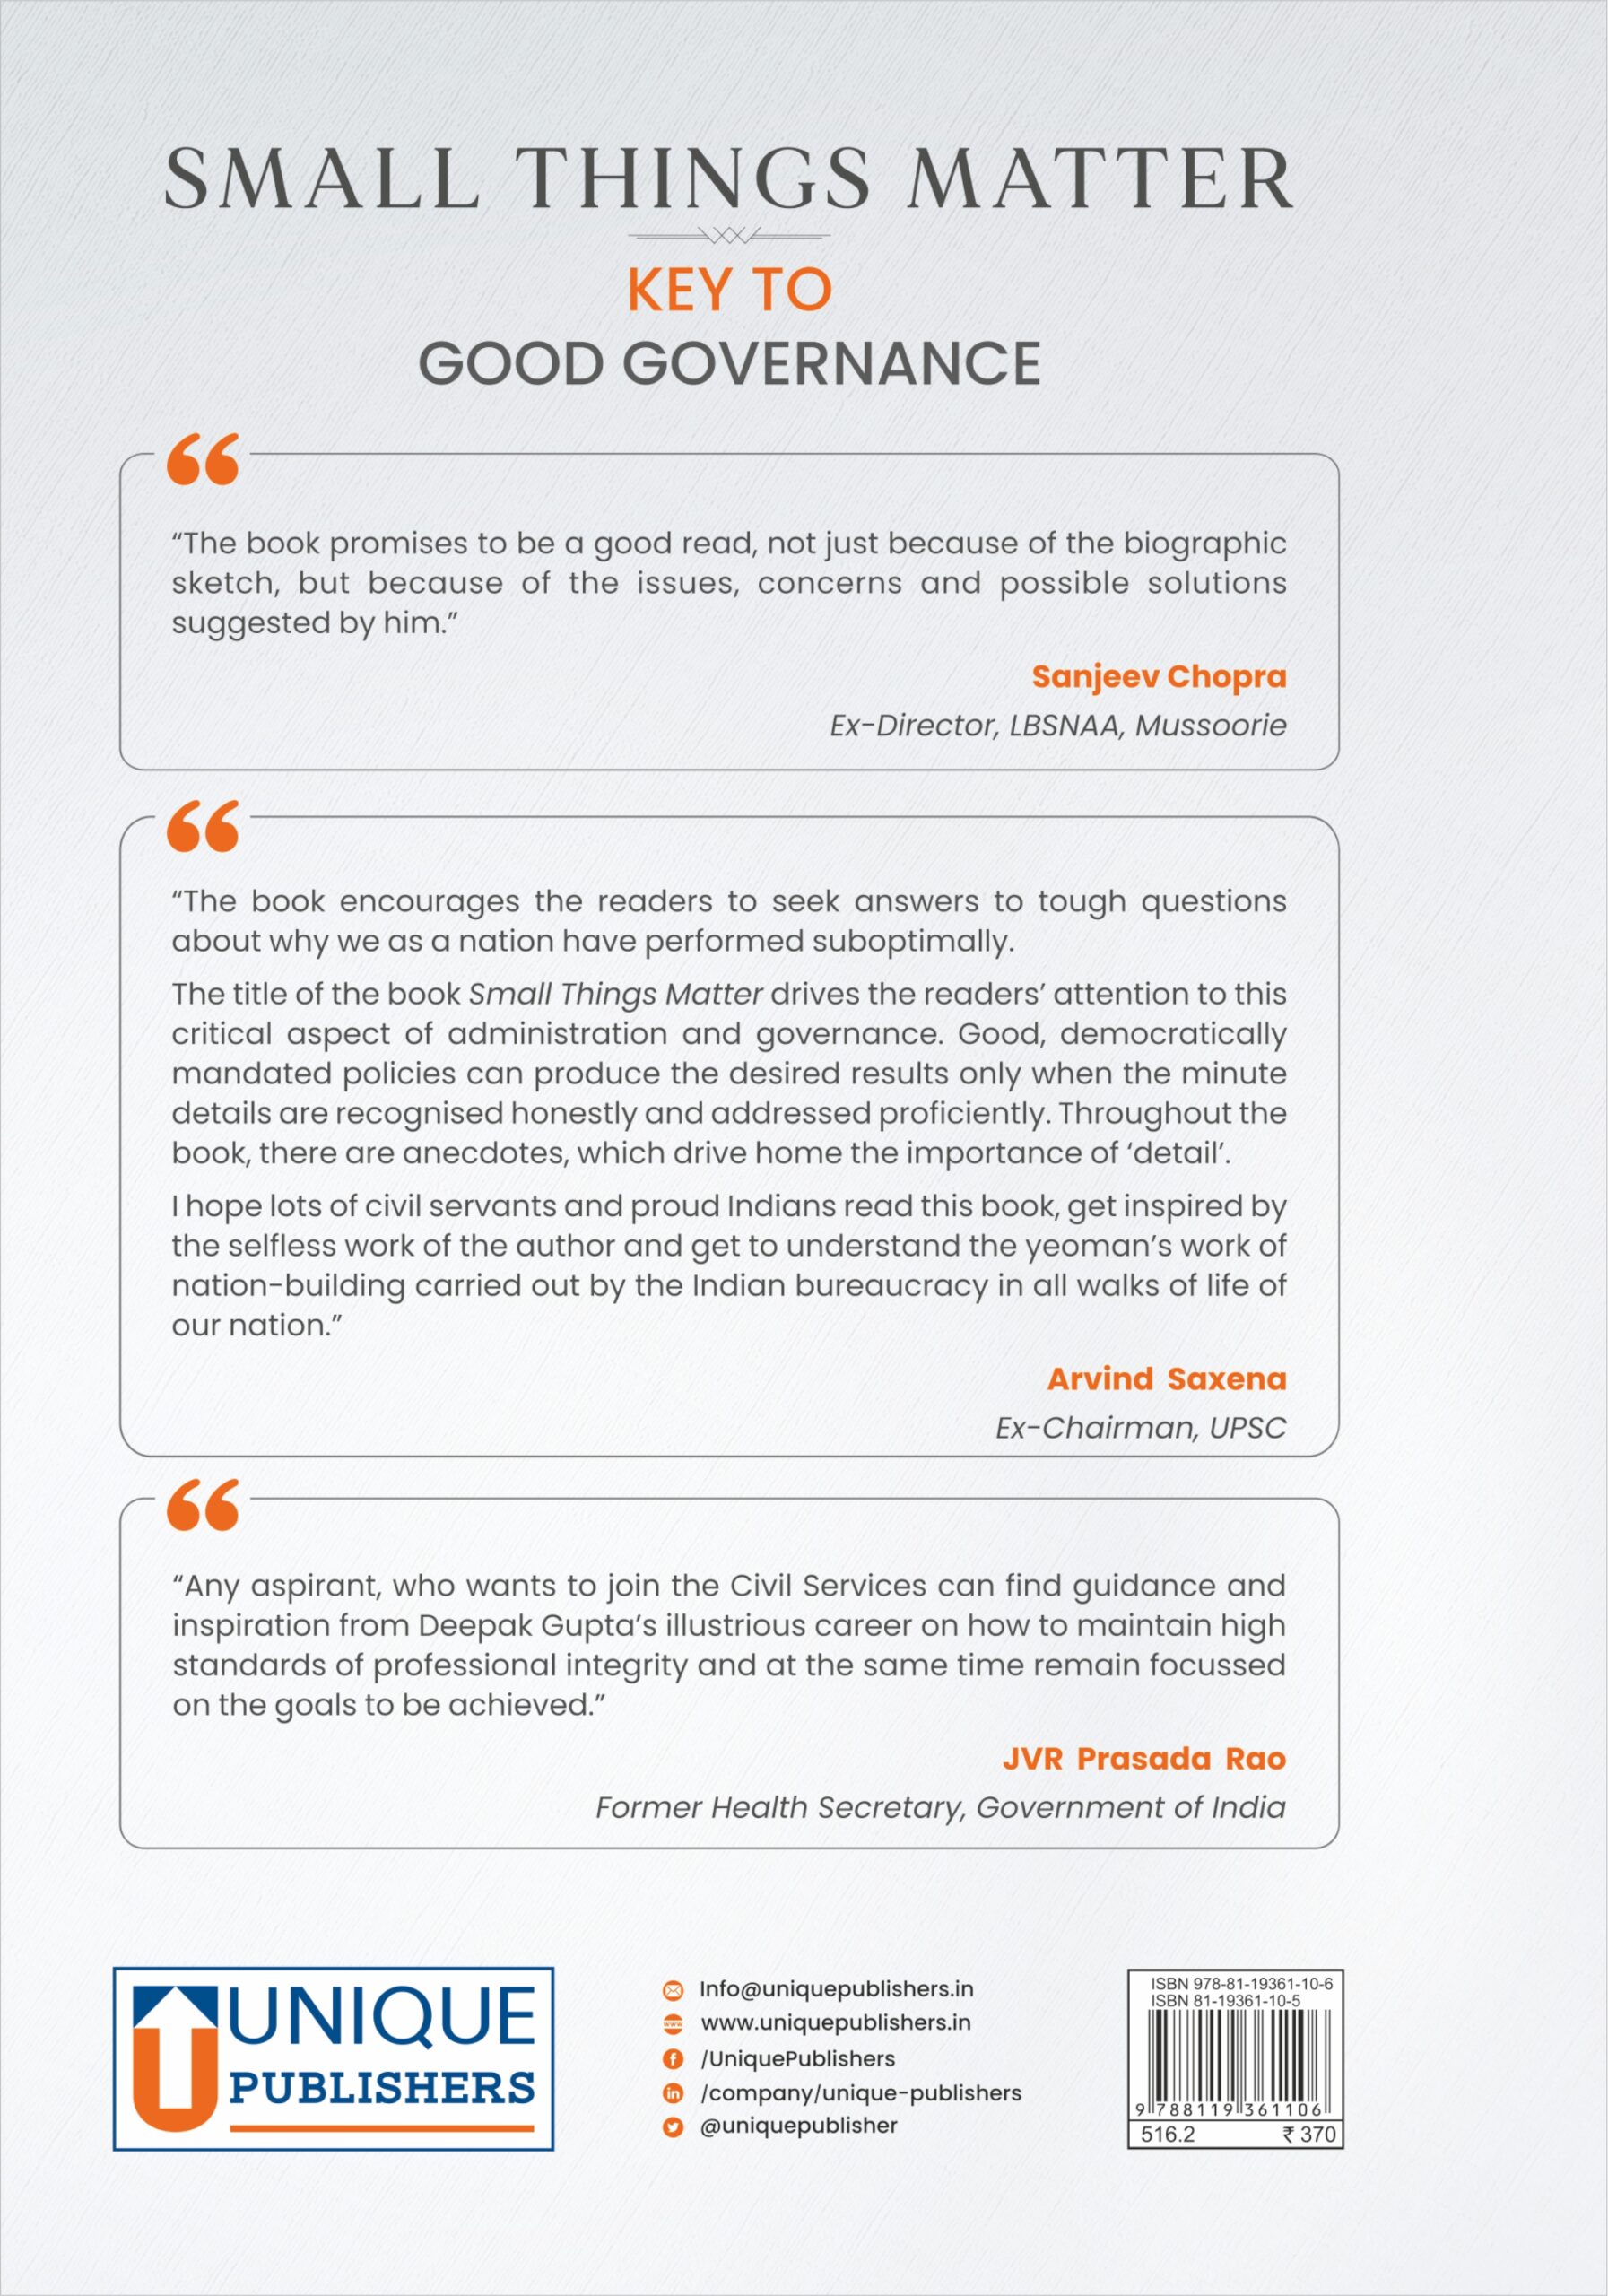 Small Things Matter – Key to Good Governance